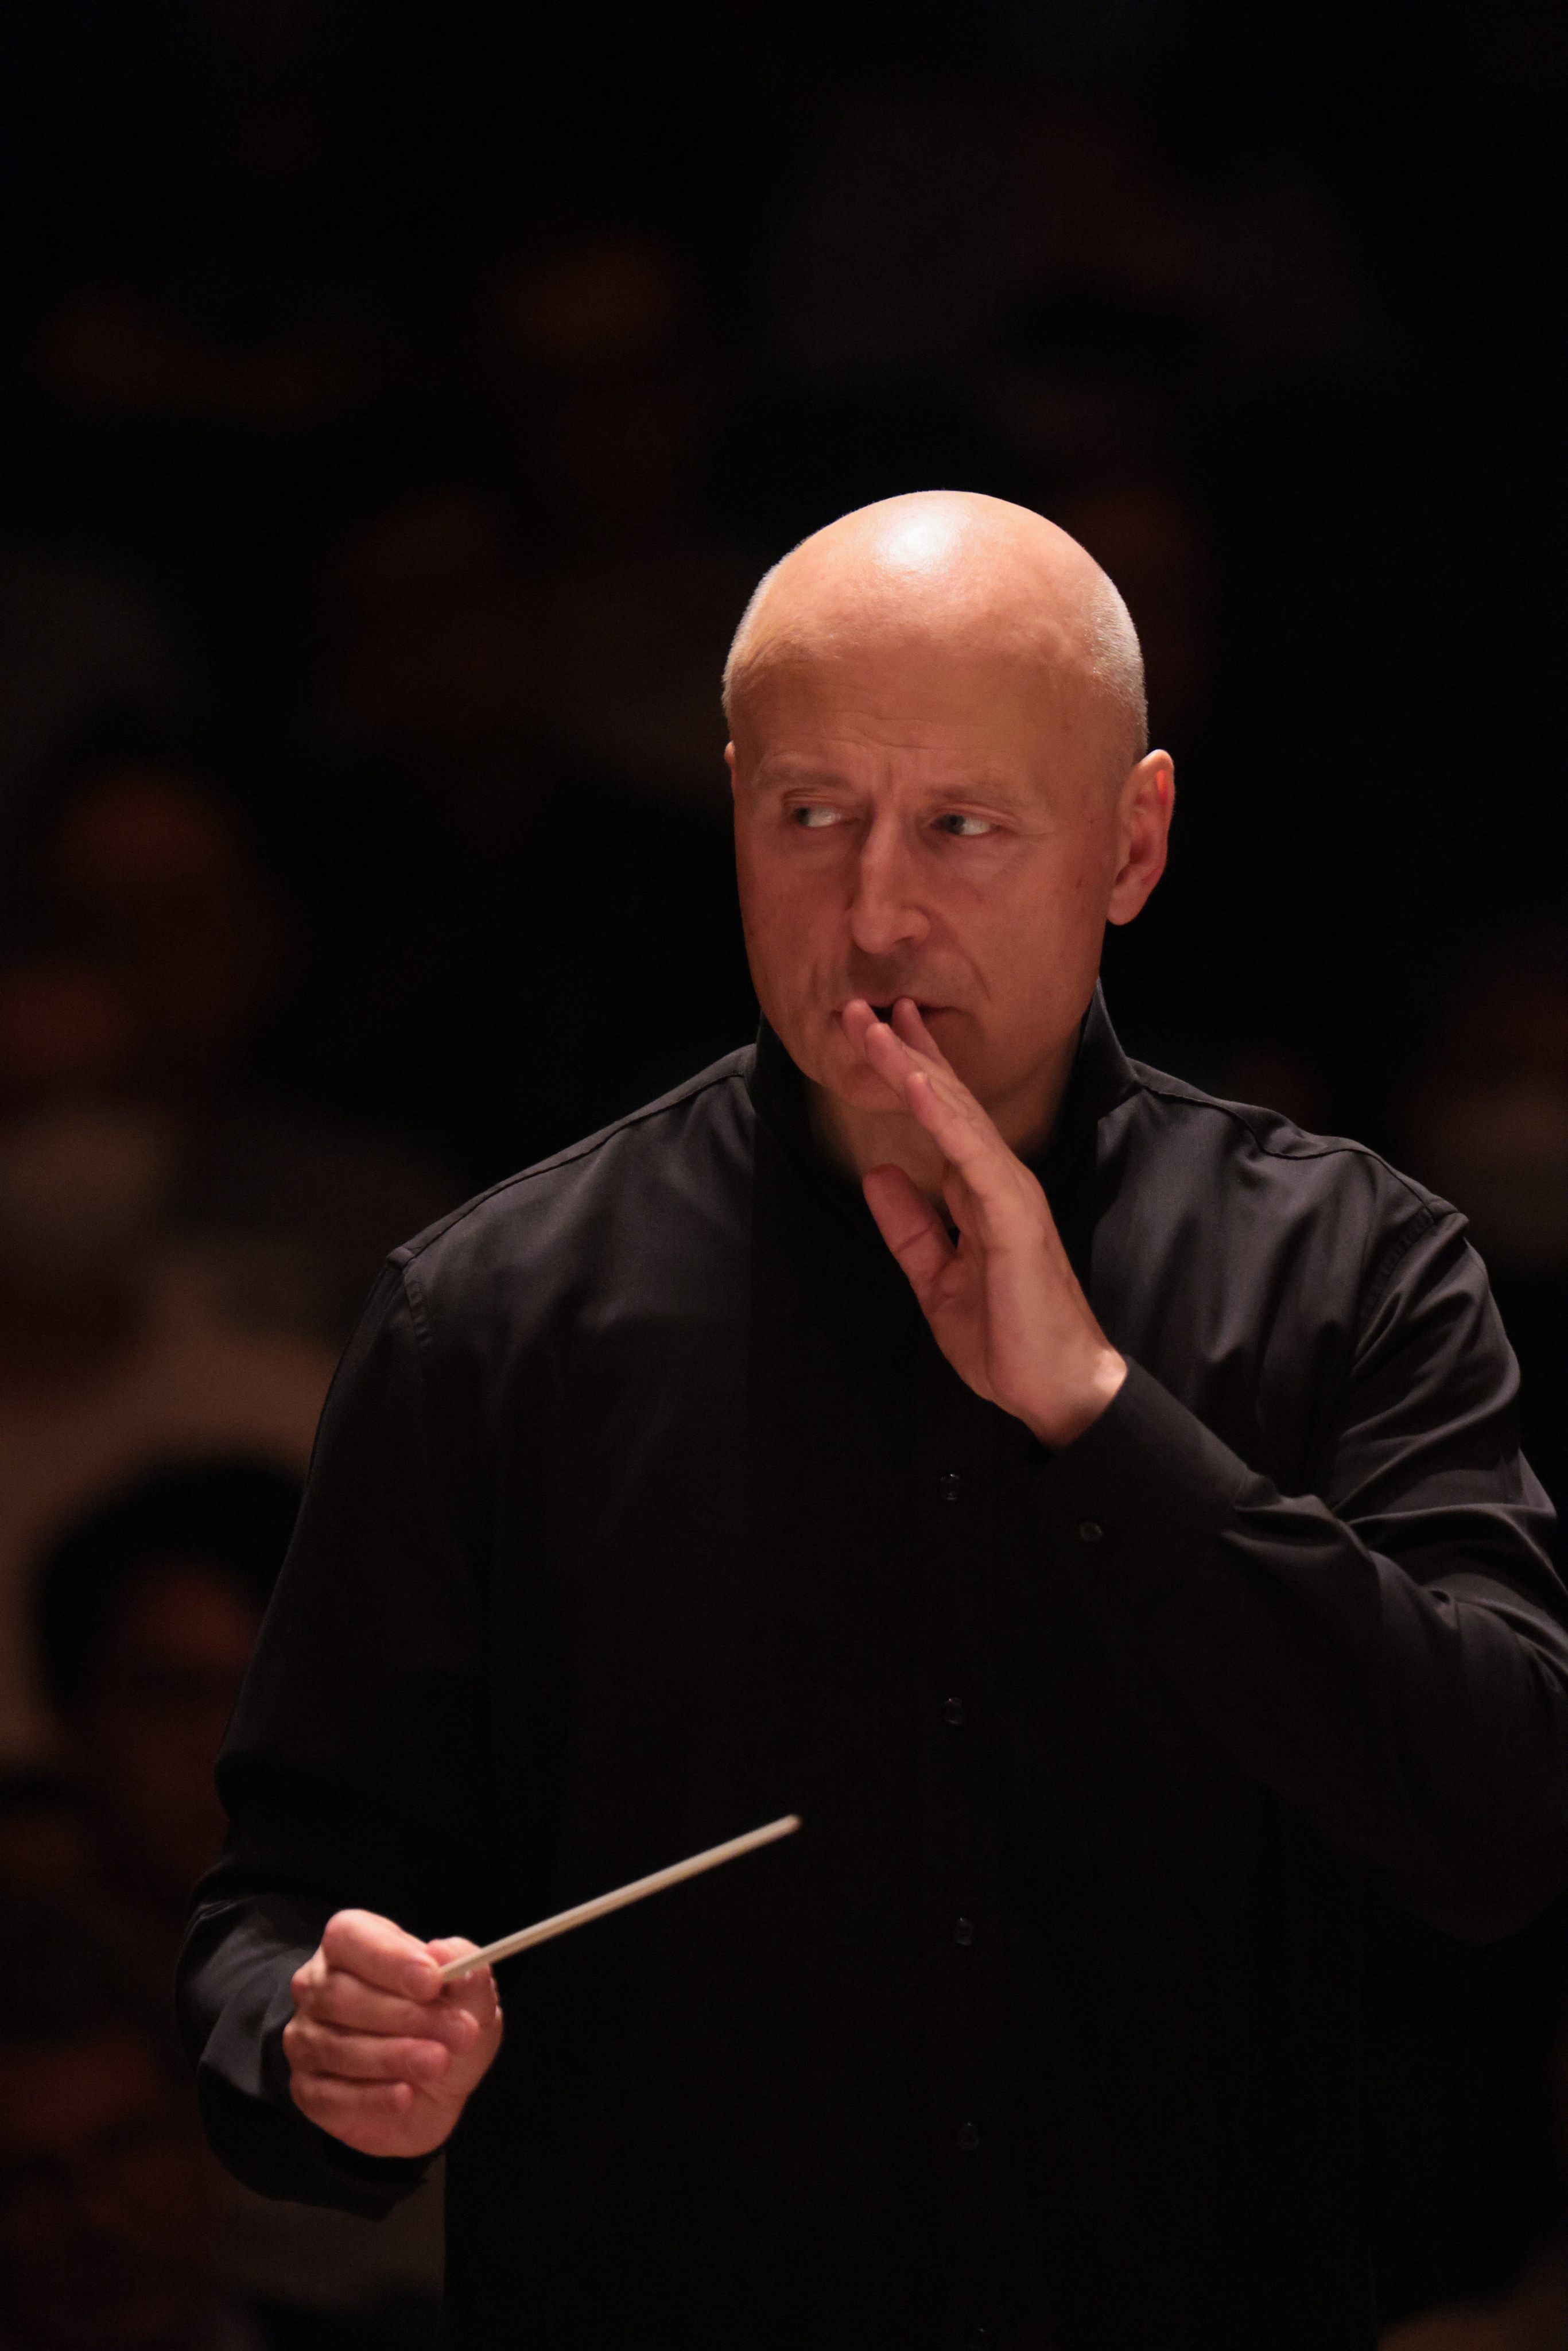 Estonian-American guest conductor Paavo Järvi had the Hong Kong Philharmonic Orchestra on a tight rein in an all-Russian concert of music by Rimsky-Korsakov, Stravinsky and Shostakovich at the Hong Kong Cultural Centre on March 29, 2024.  Photo: Keith Hiro/HK Phil